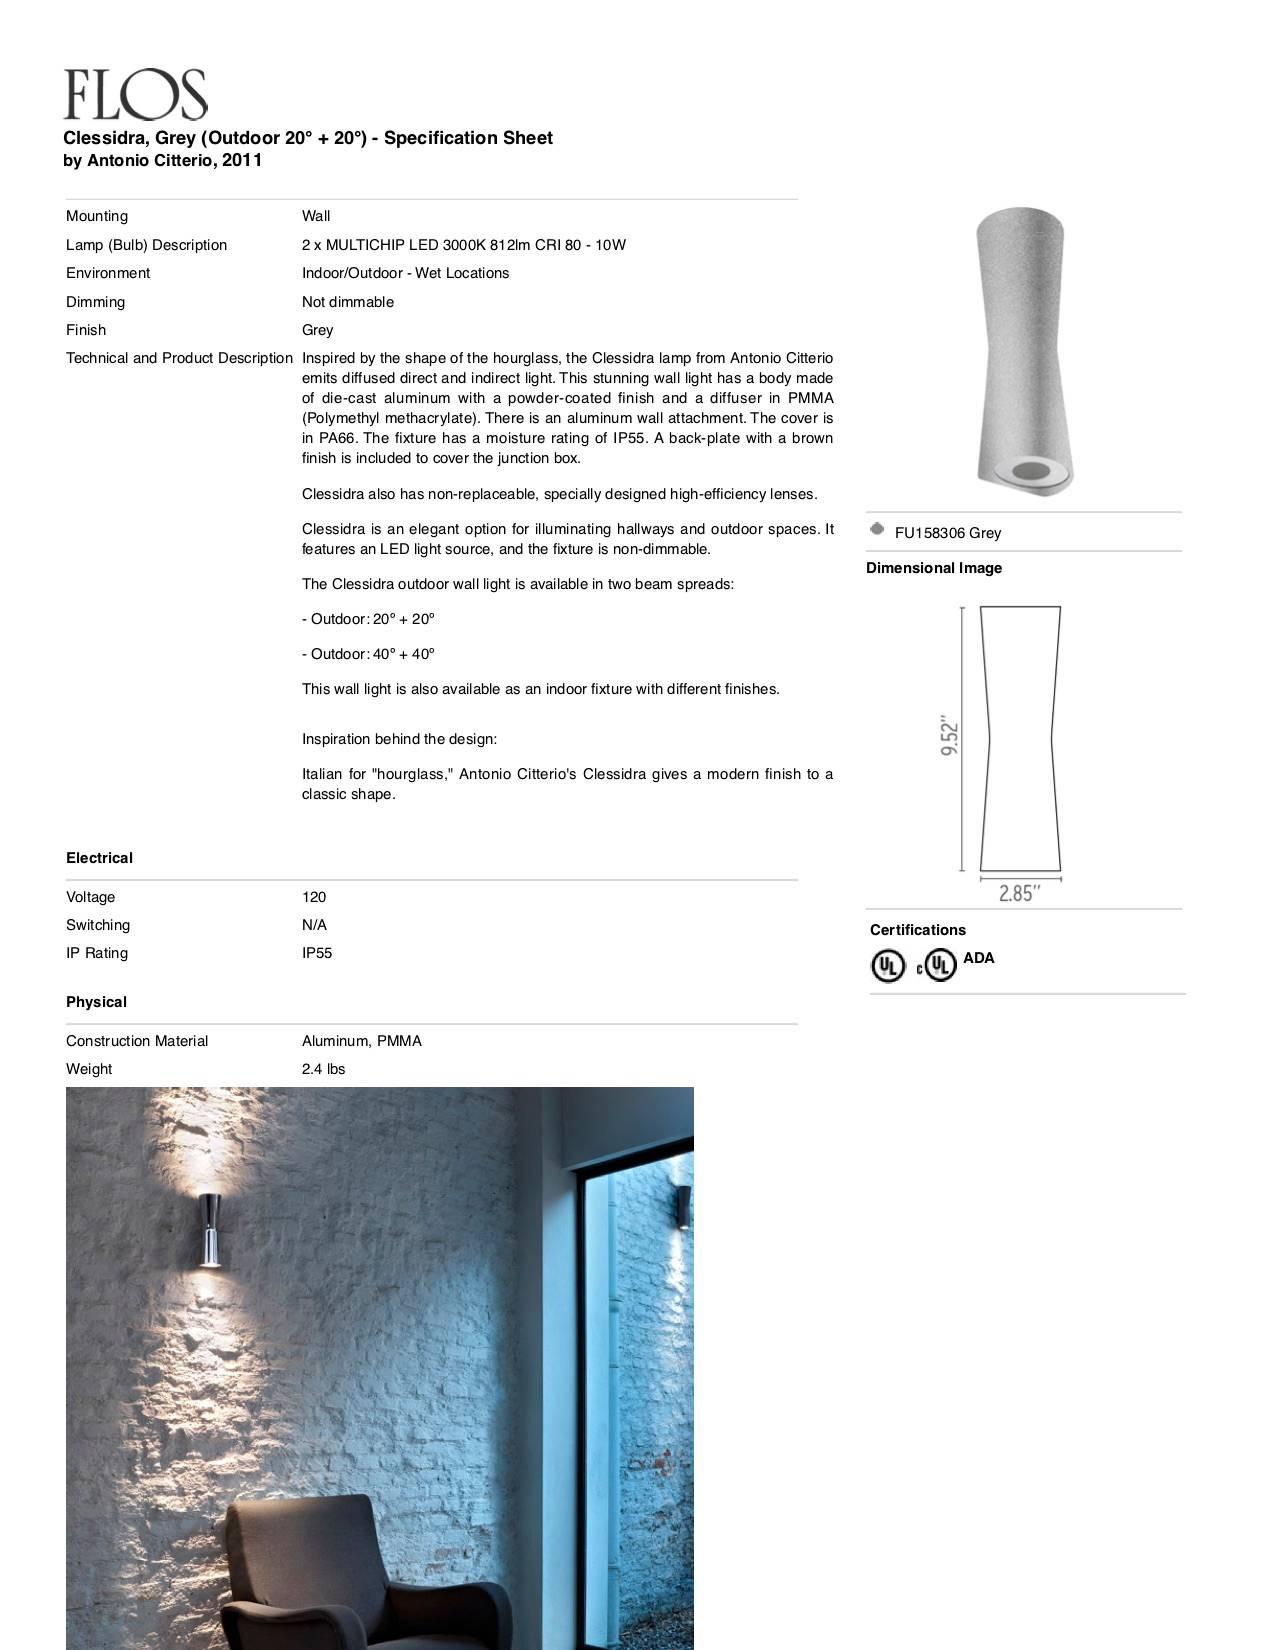 Modern FLOS Clessidra 40° + 40° Indoor Wall Lamp in Chrome by Antonio Citterio